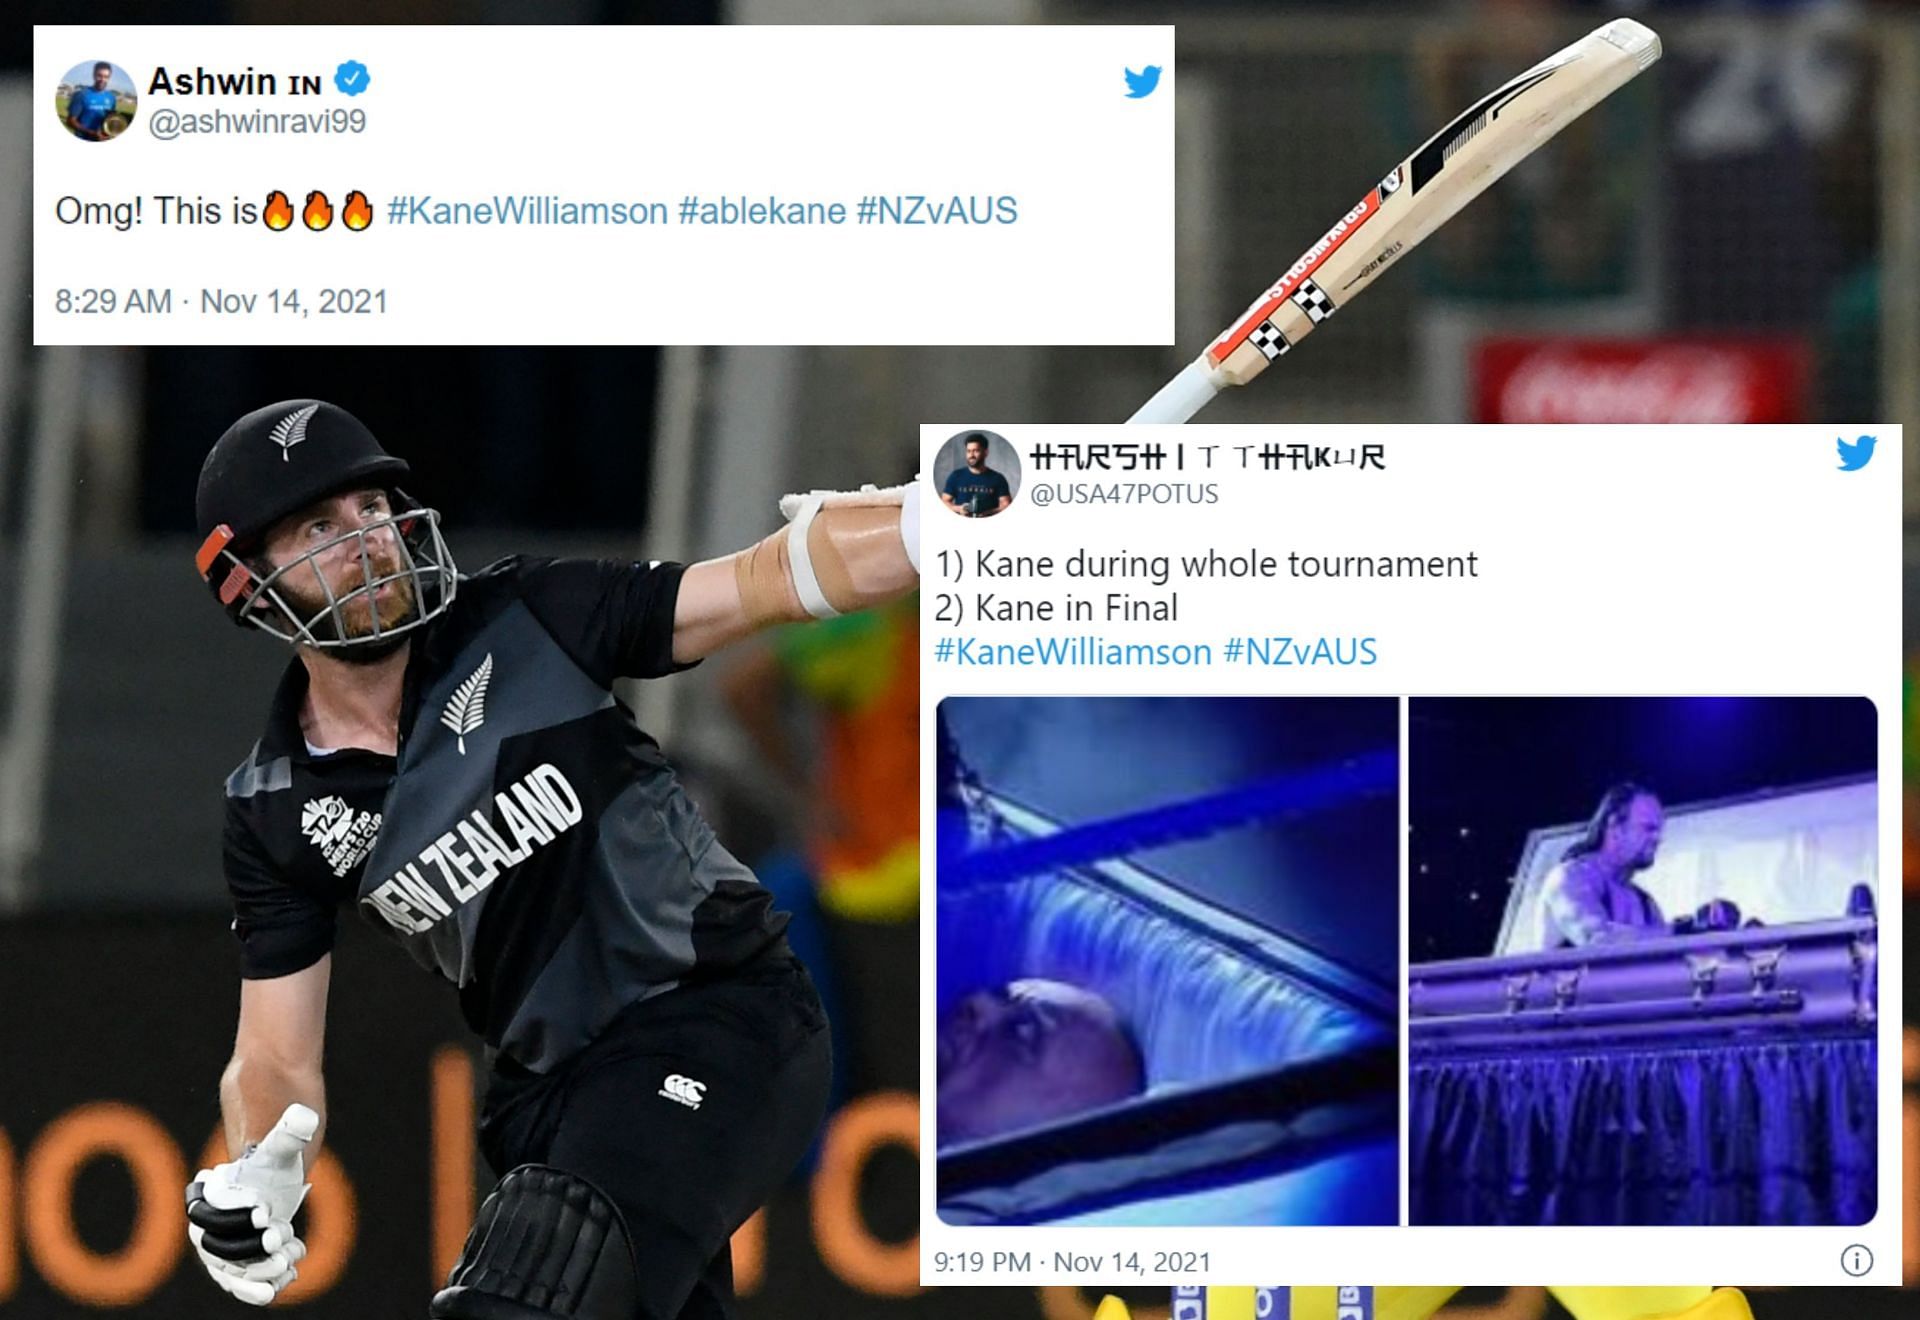 Twitterati heaps praise on Kane Williamson for his sensational knock in the 2021 T20 World Cup final